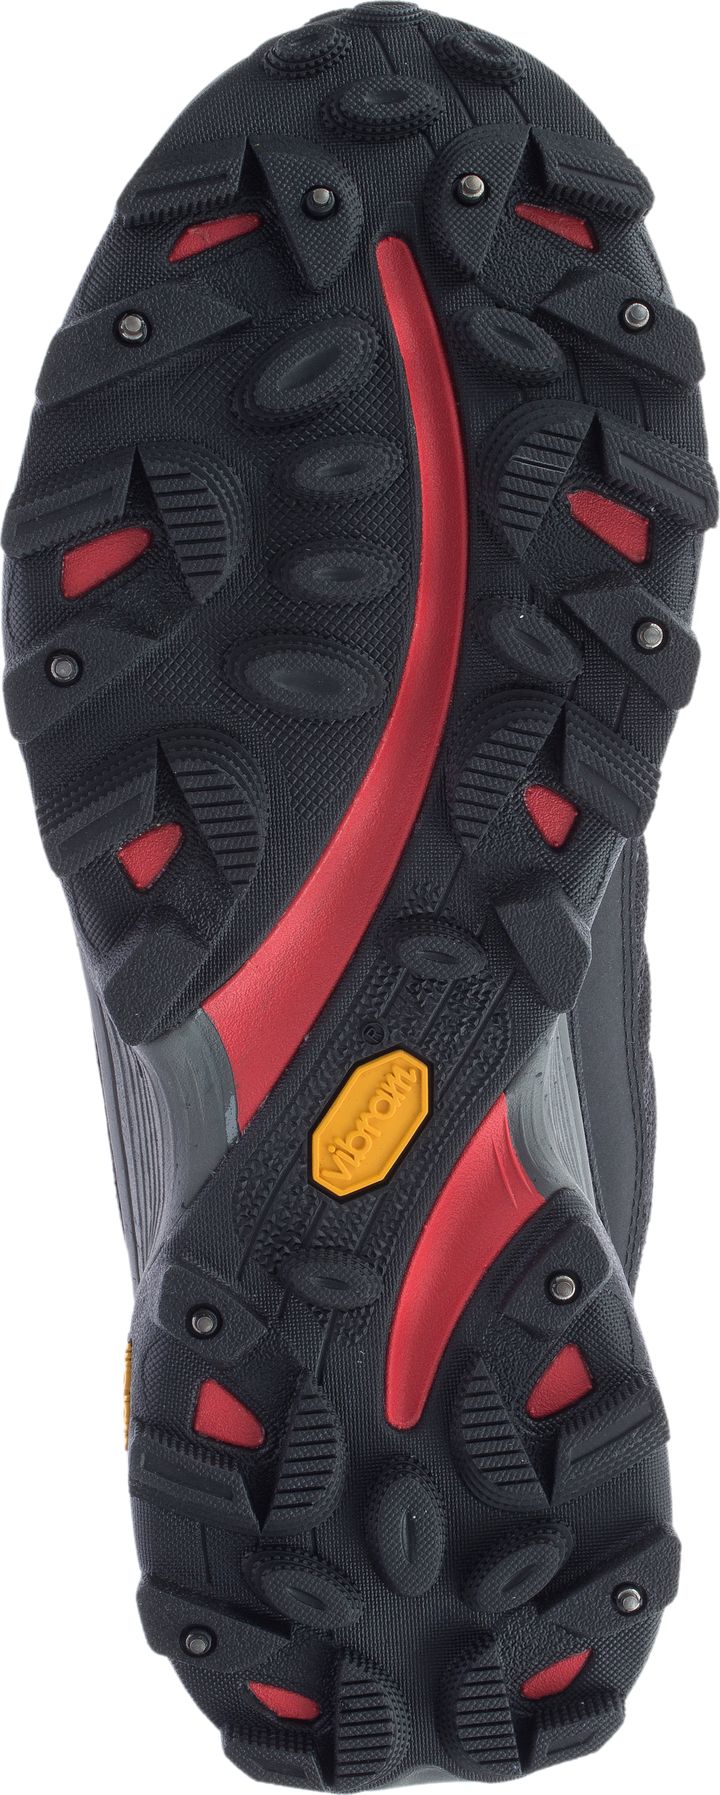 Merrell Moab Speed Thermo Mid Waterproof Spike Boots Black Red - 46